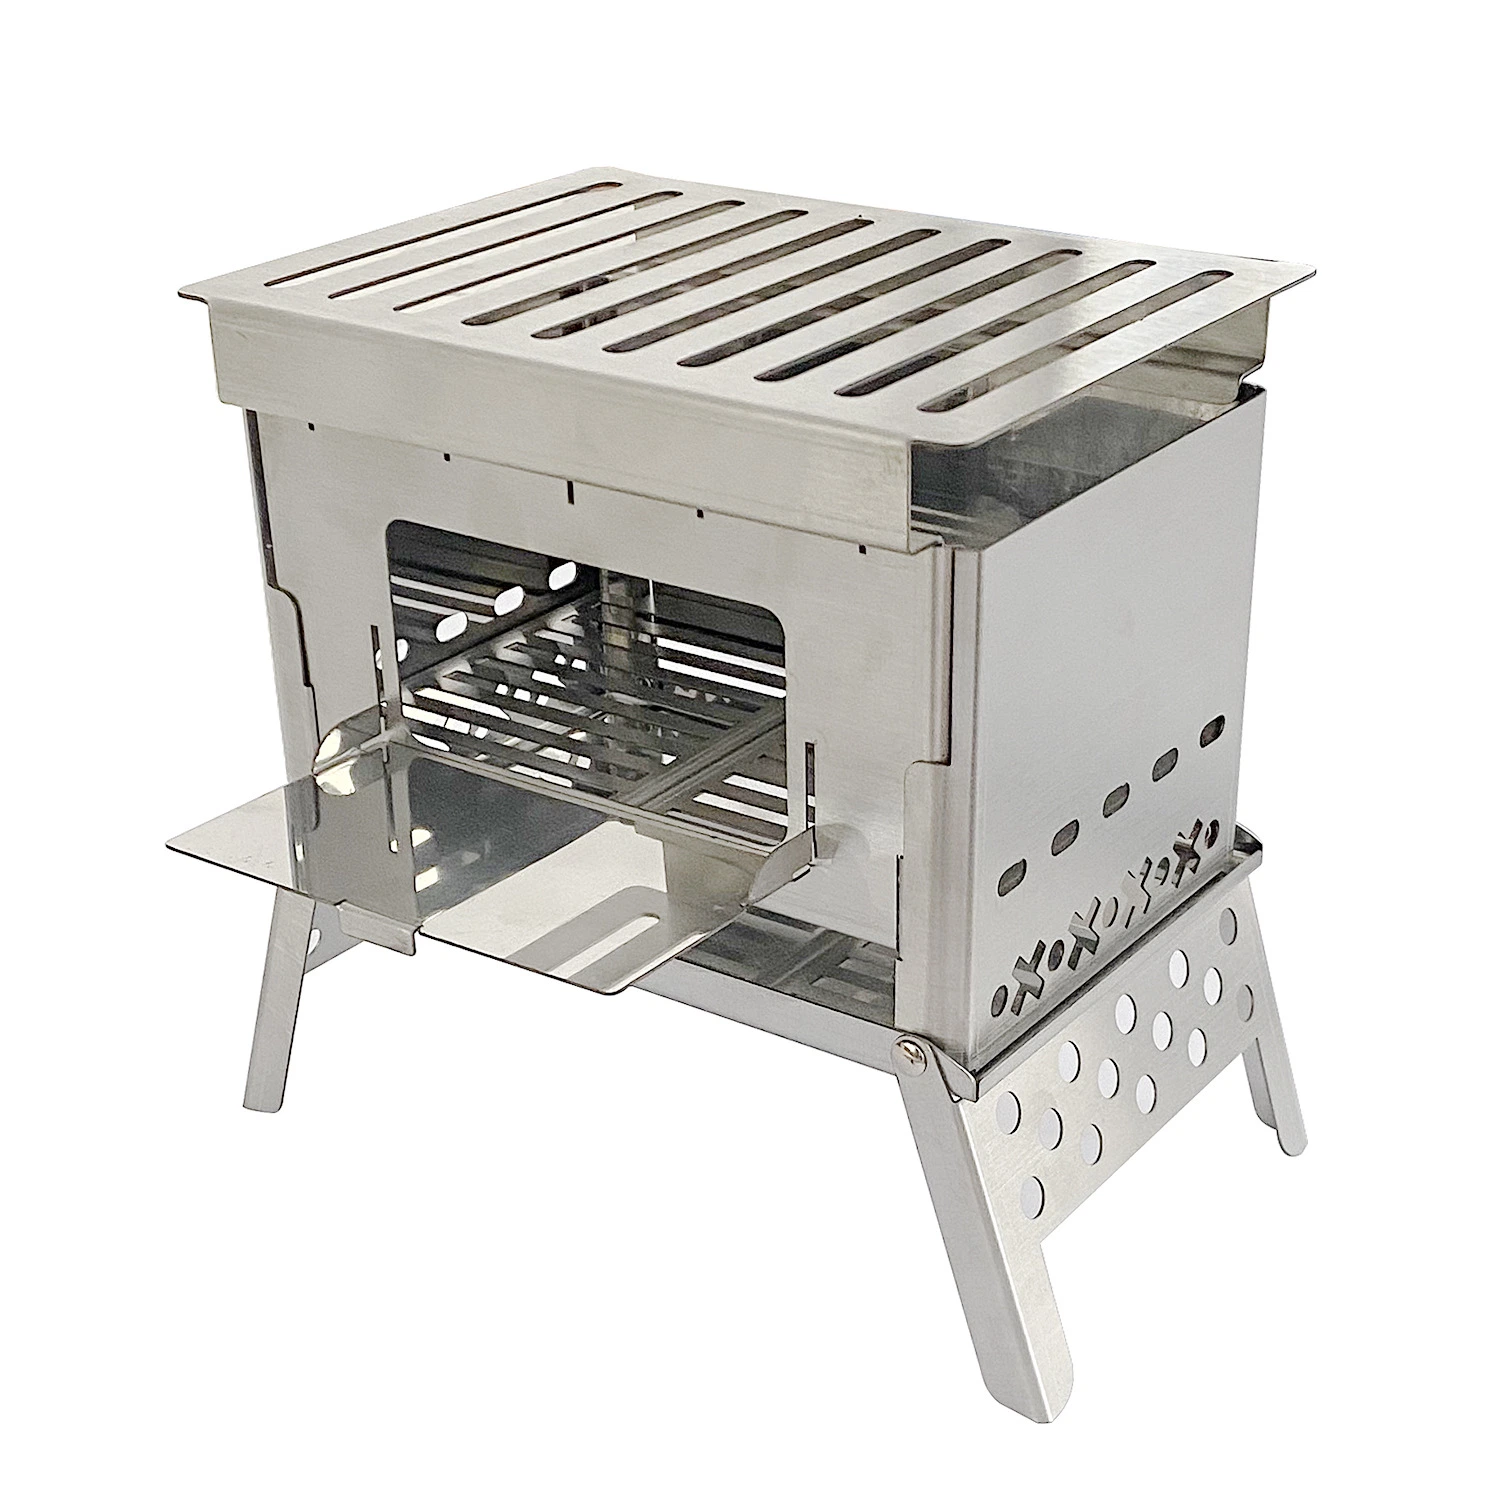 Outdoor Stainless Steel Folding Mini Assembled Barbecue Grill Camping Warmer Burning Stove